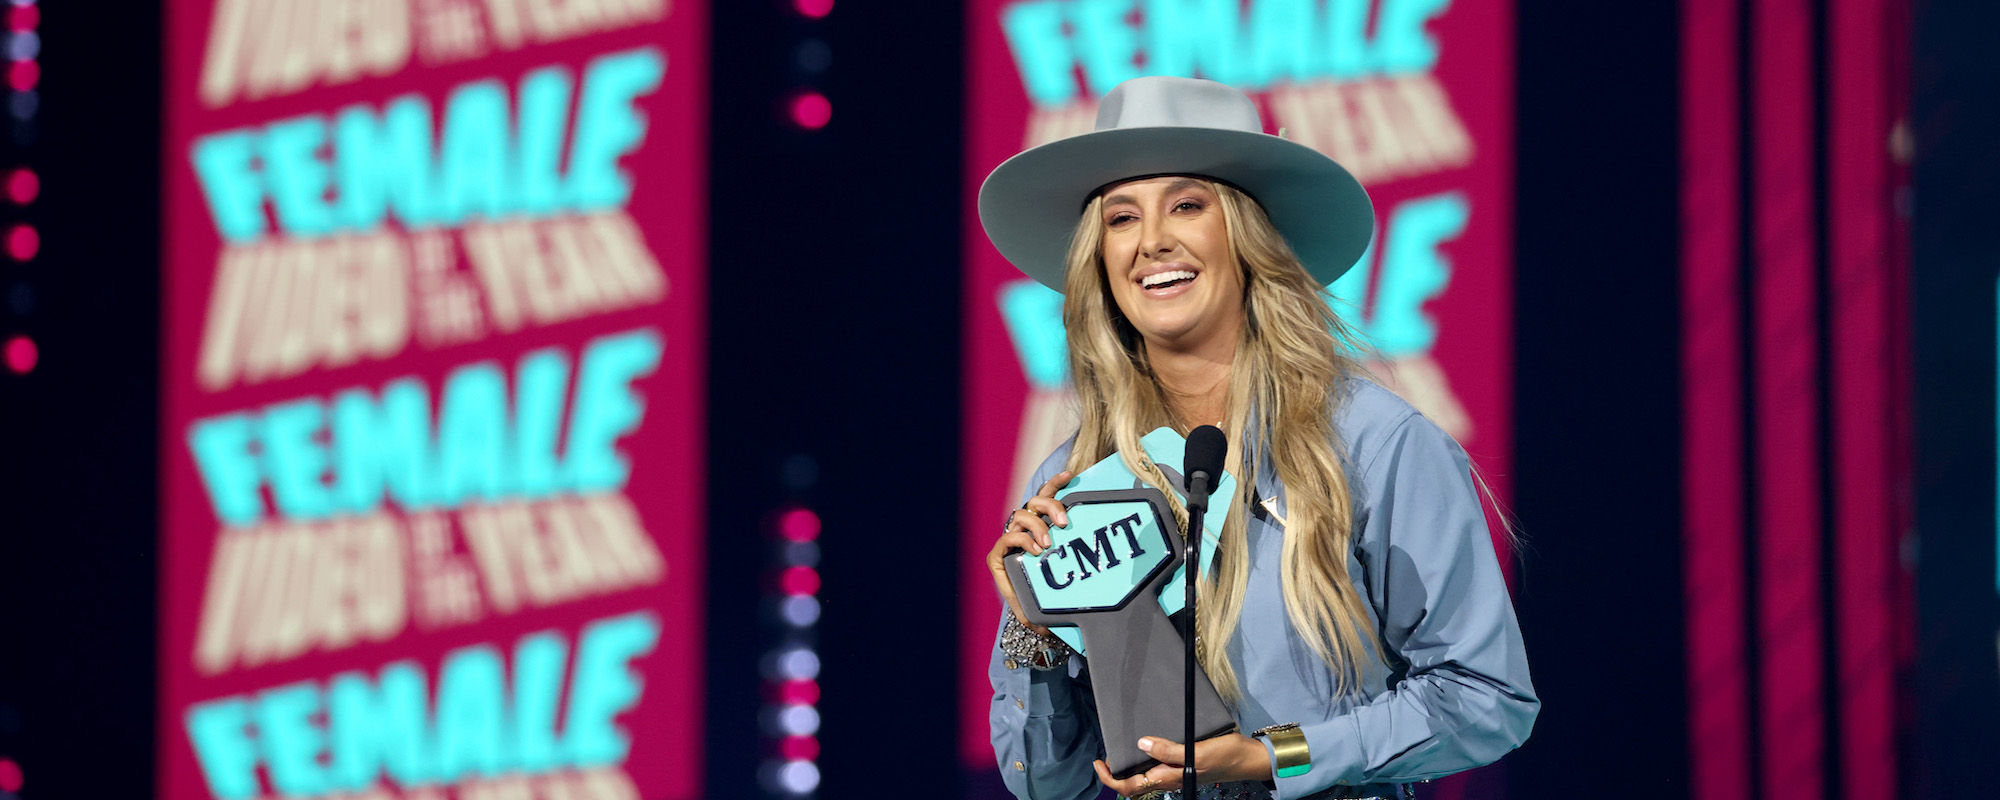 Lainey Wilson Reacts to CMT Music Awards Wins: “We Ain’t Done Yet!”